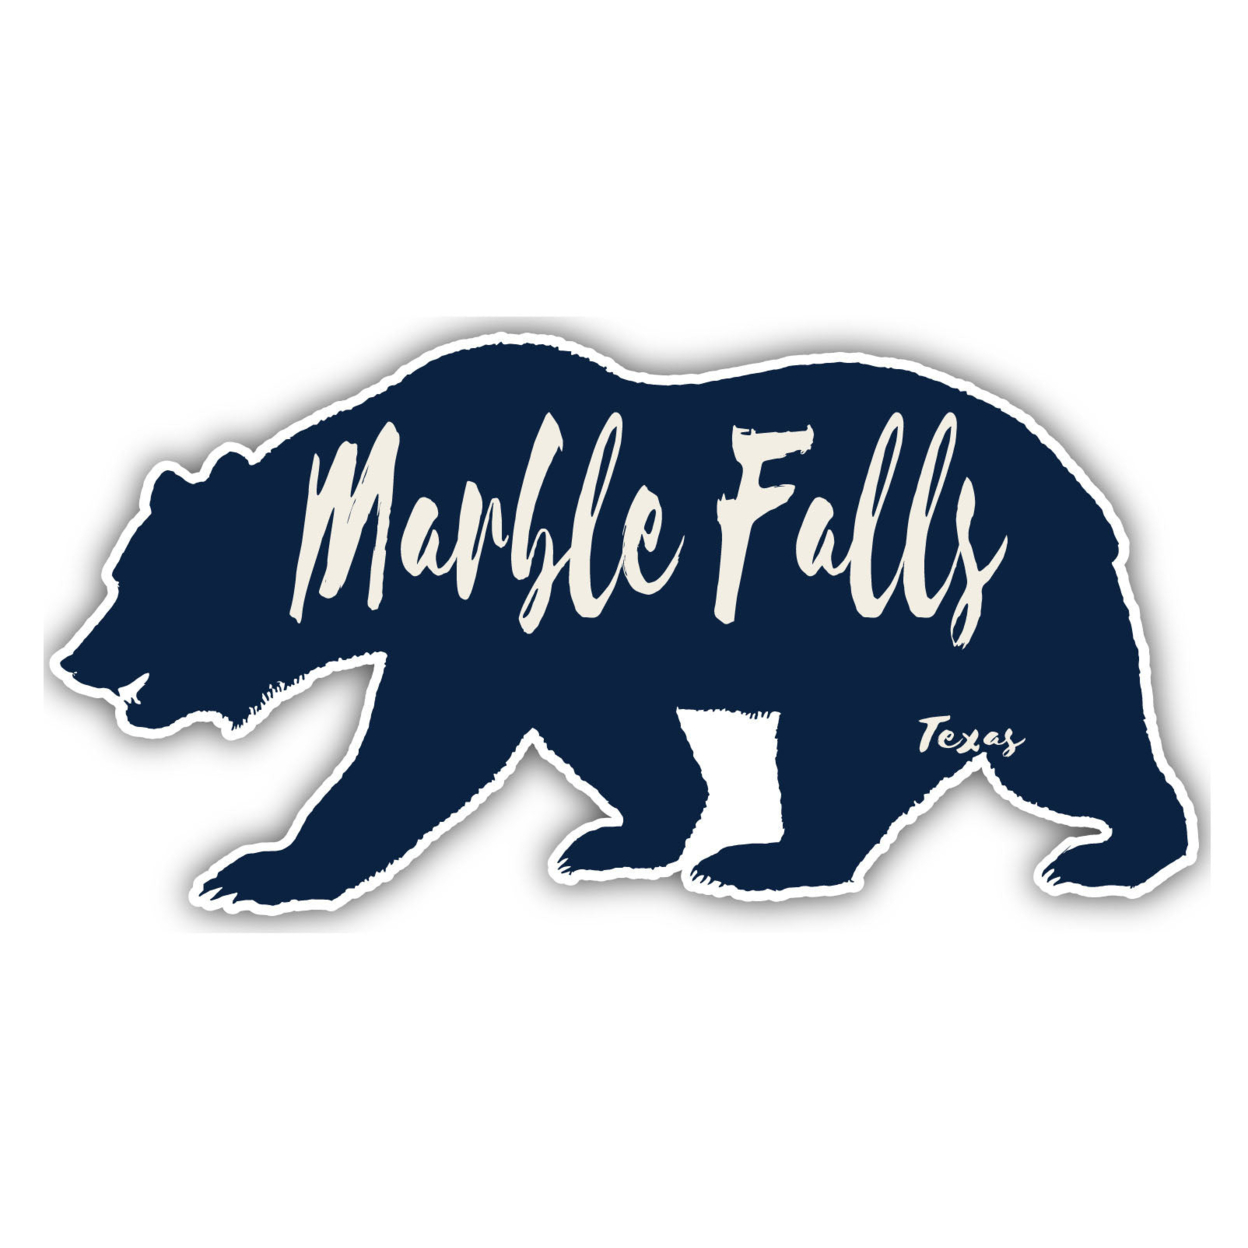 Marble Falls Texas Souvenir Decorative Stickers (Choose Theme And Size) - 2-Inch, Bear